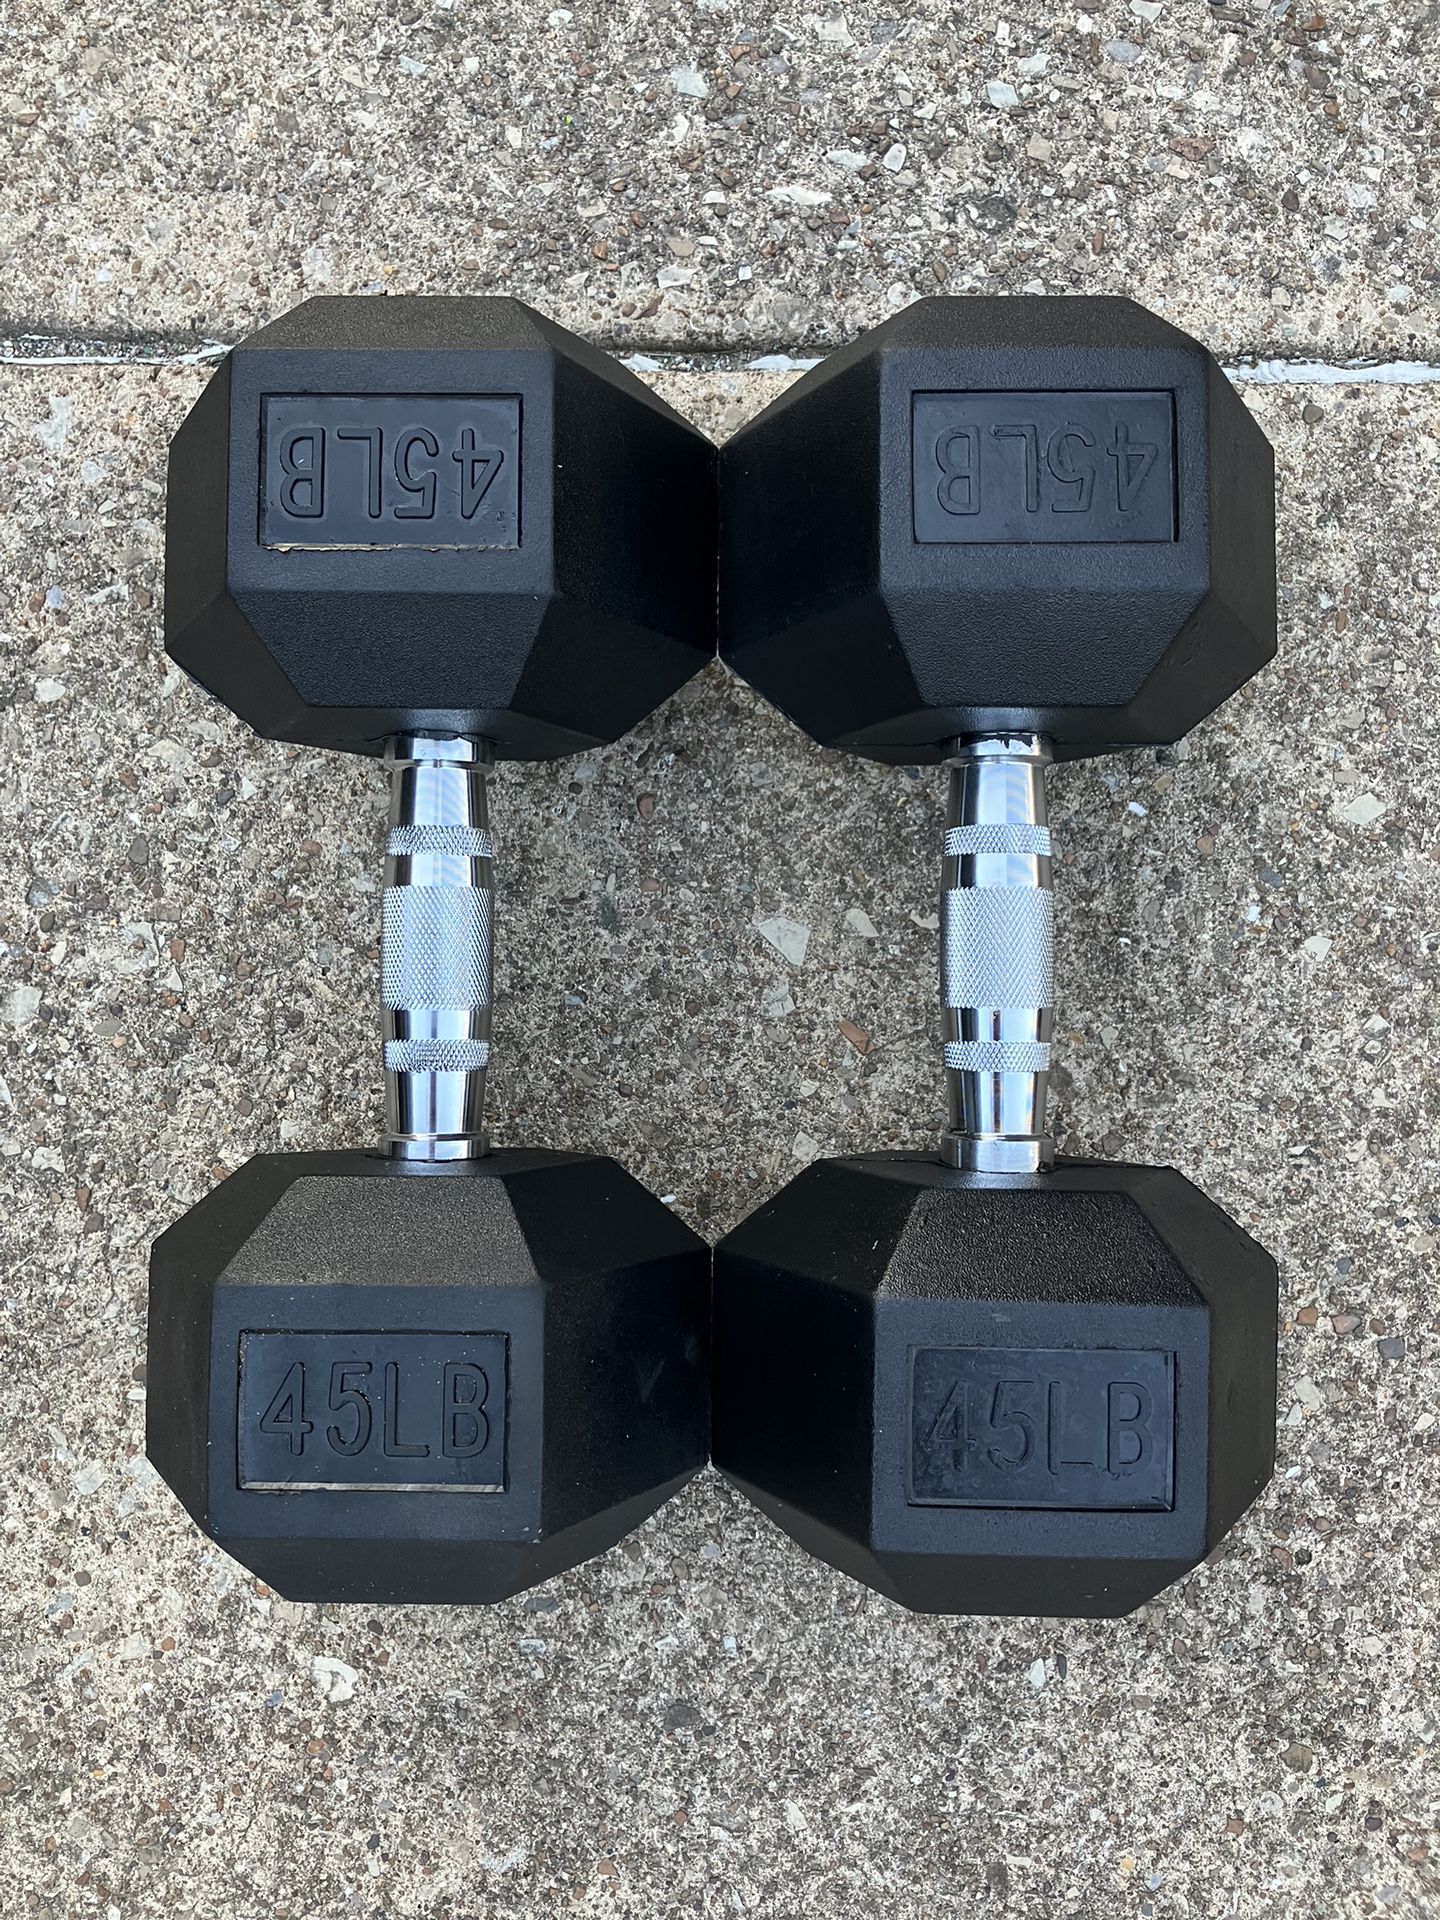 BRAND NEW 45 lb dumbbells dumbbell set 90 Ibs total Rubber Hex weights weight pair pounds pound 45lb 45lbs